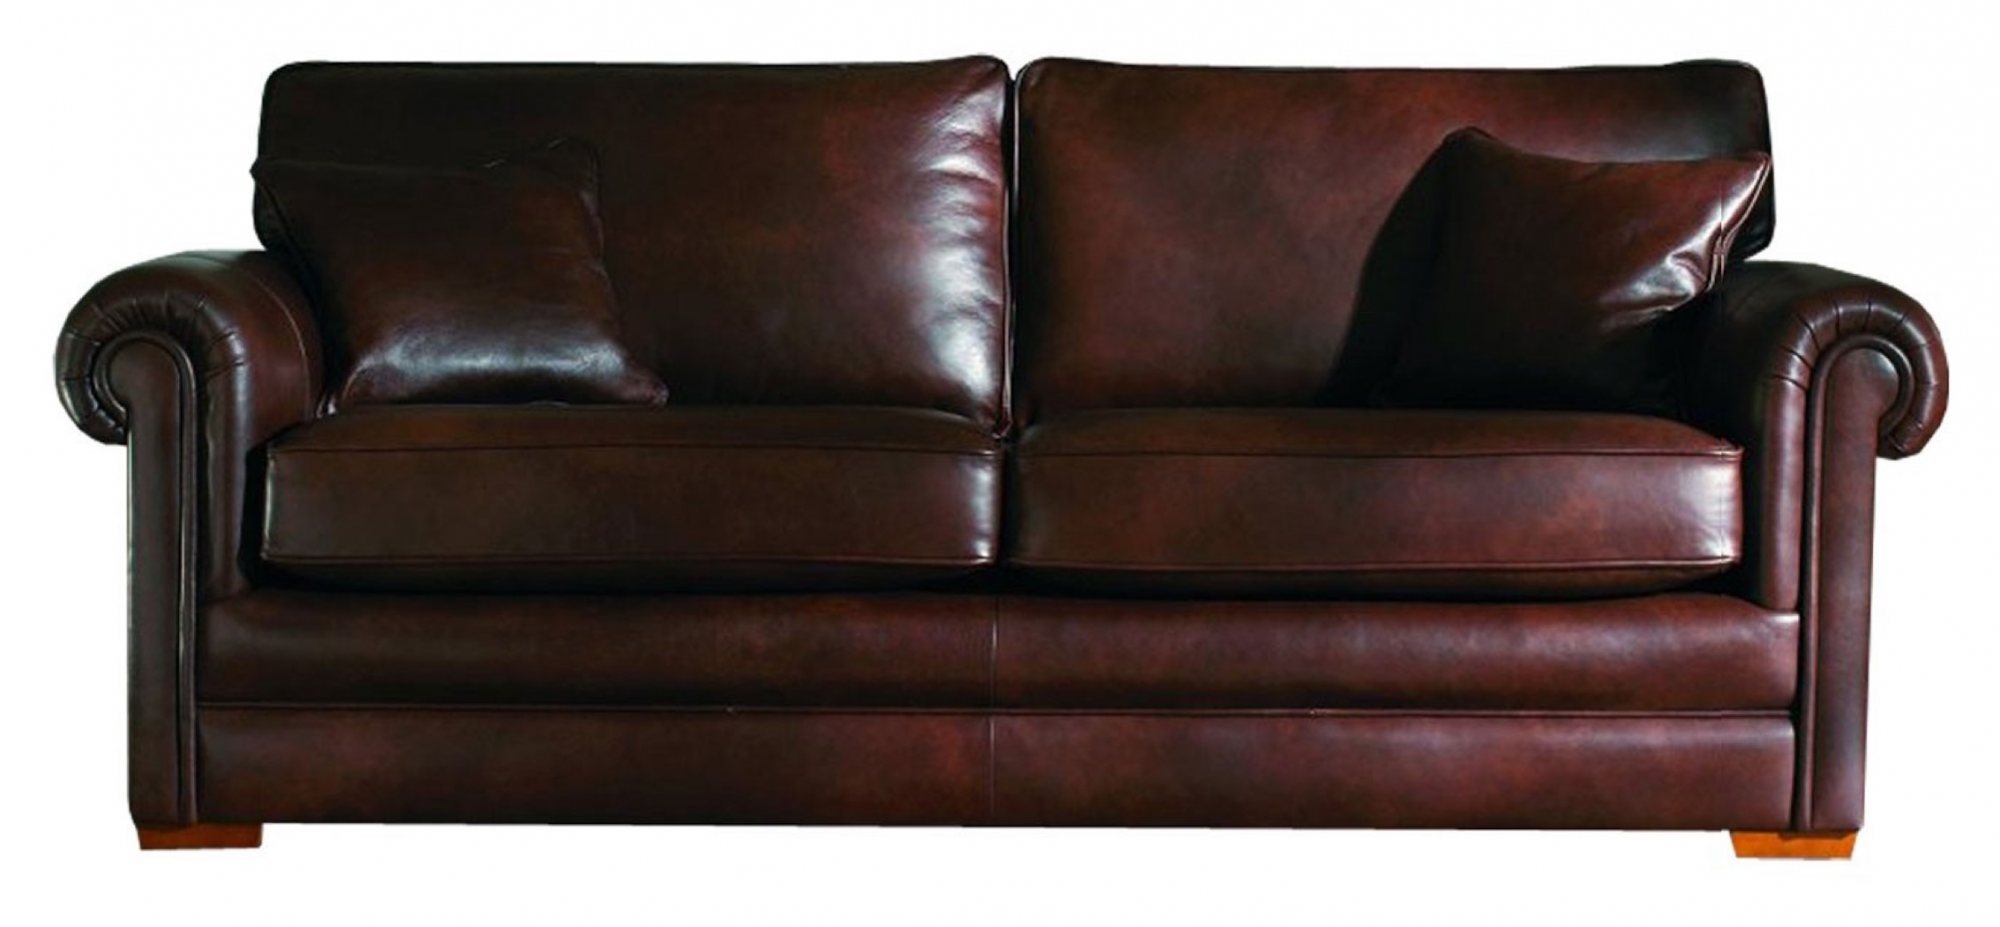 parker knoll canterbury leather sofa